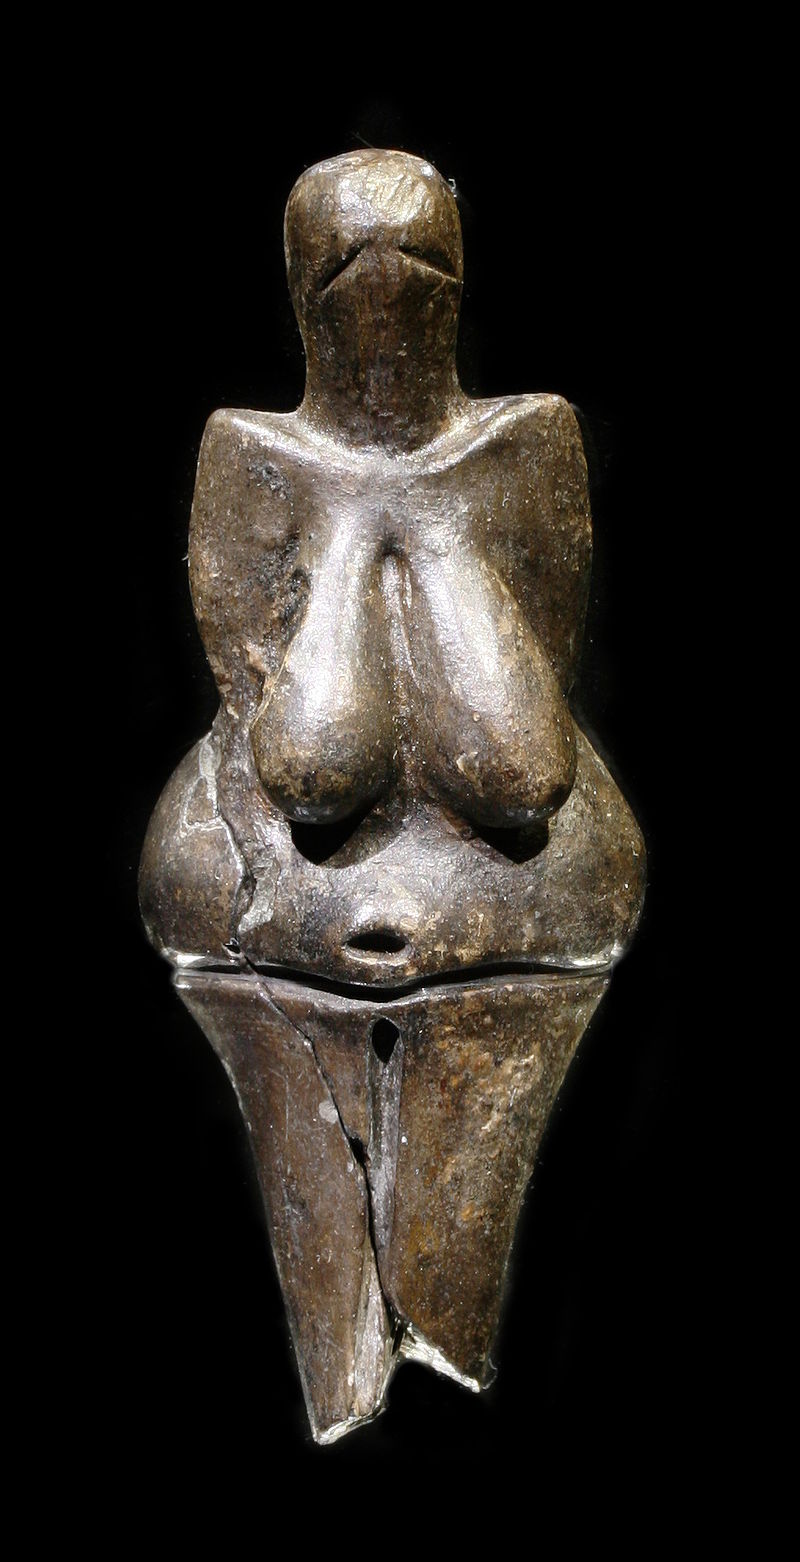 A statue made of polished dark stone representing a female figure with exaggerated breasts and hips. There are no defined facial features and distinct arms are not visible.